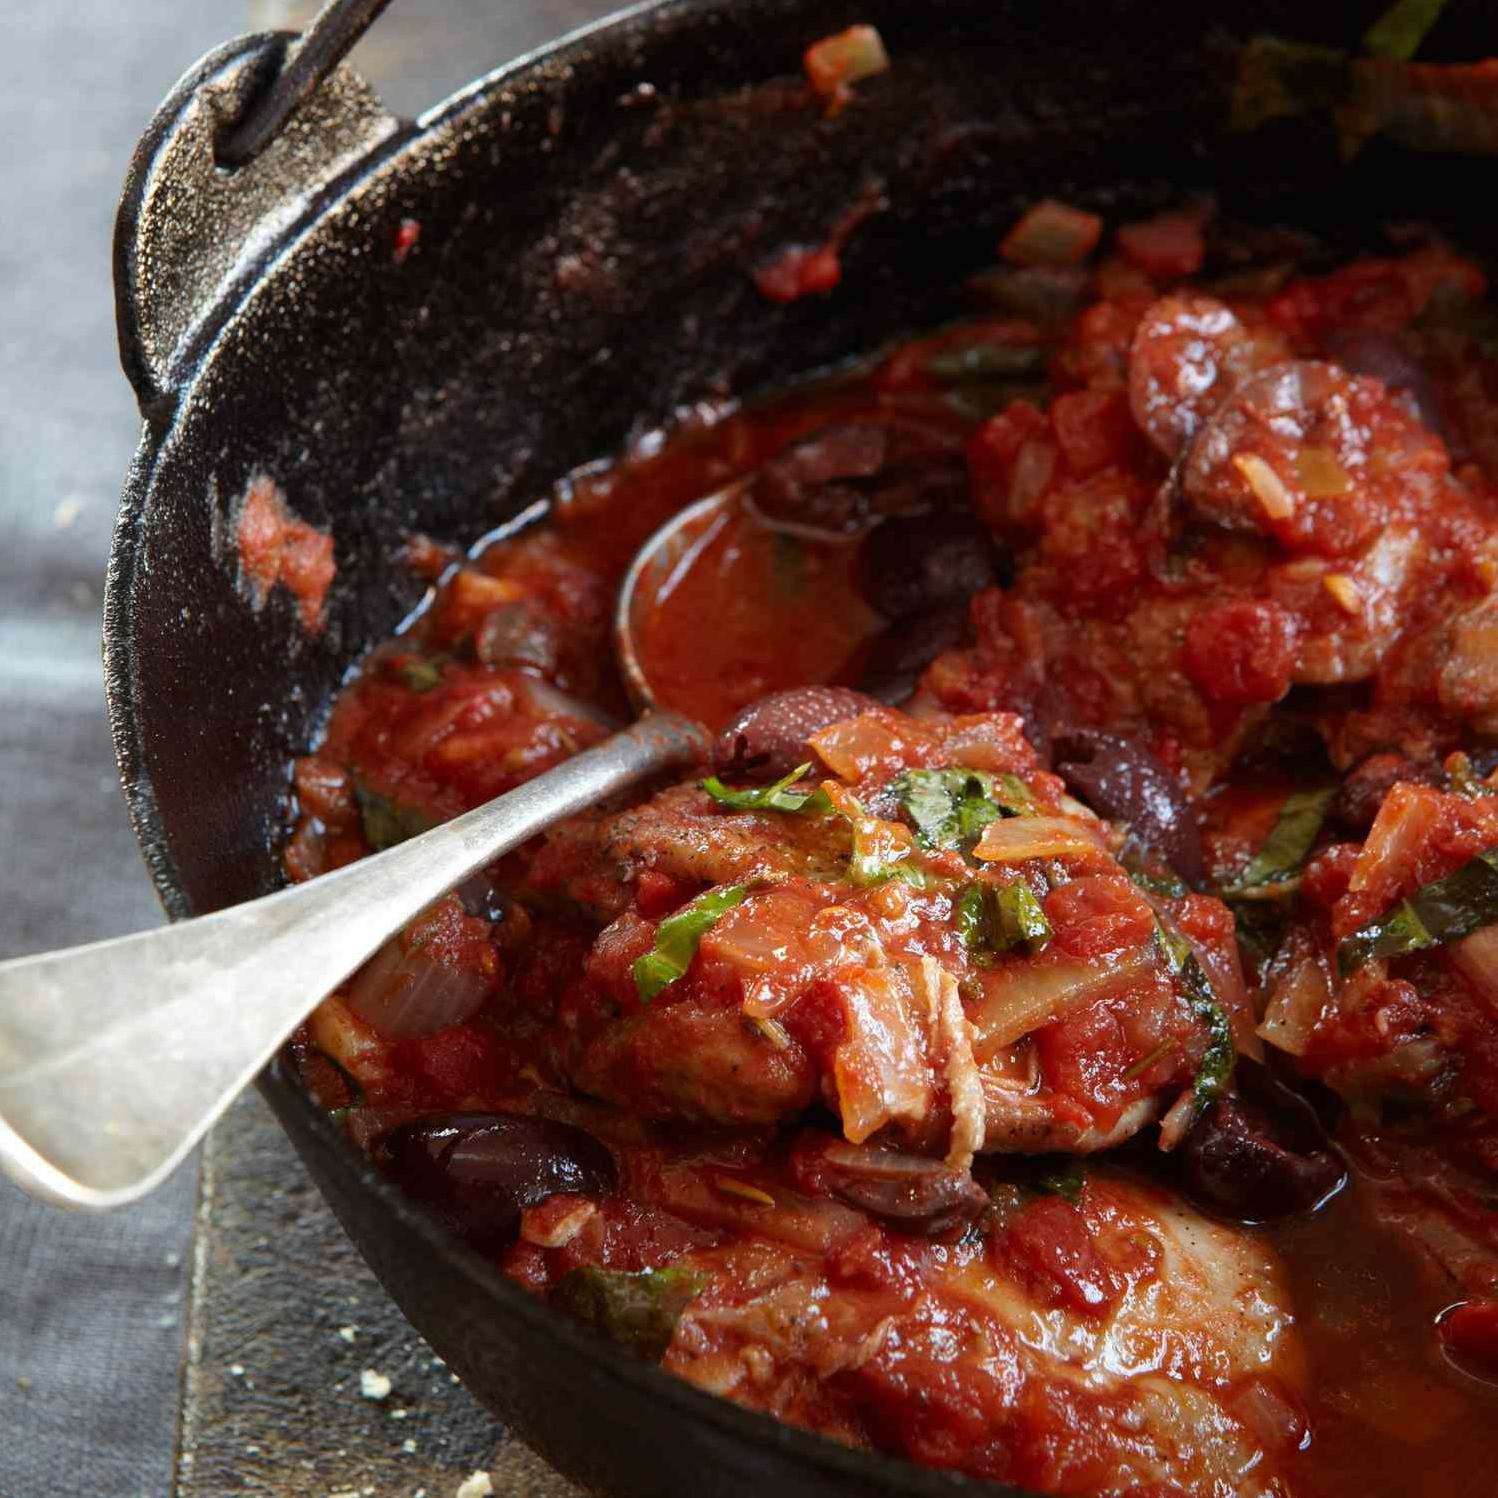  Tender chicken simmered in a flavorful tomato sauce with salty olives.